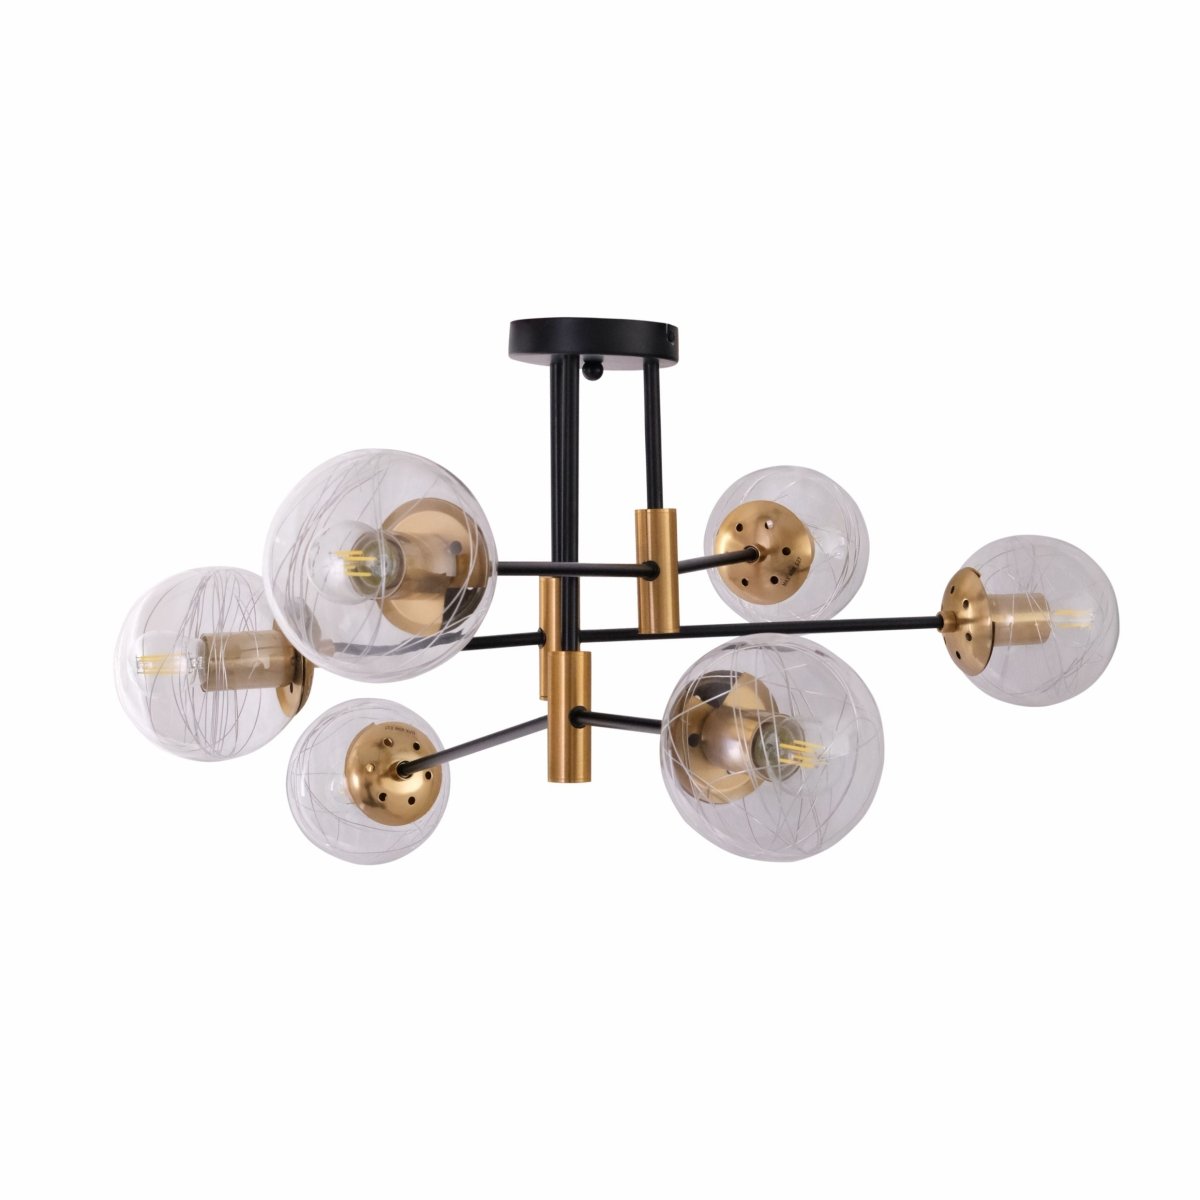 Main image of Clear Glass Globe Gold and Black Metal Semi Flush Ceiling Light with 6xE27 Fitting | TEKLED 159-17432